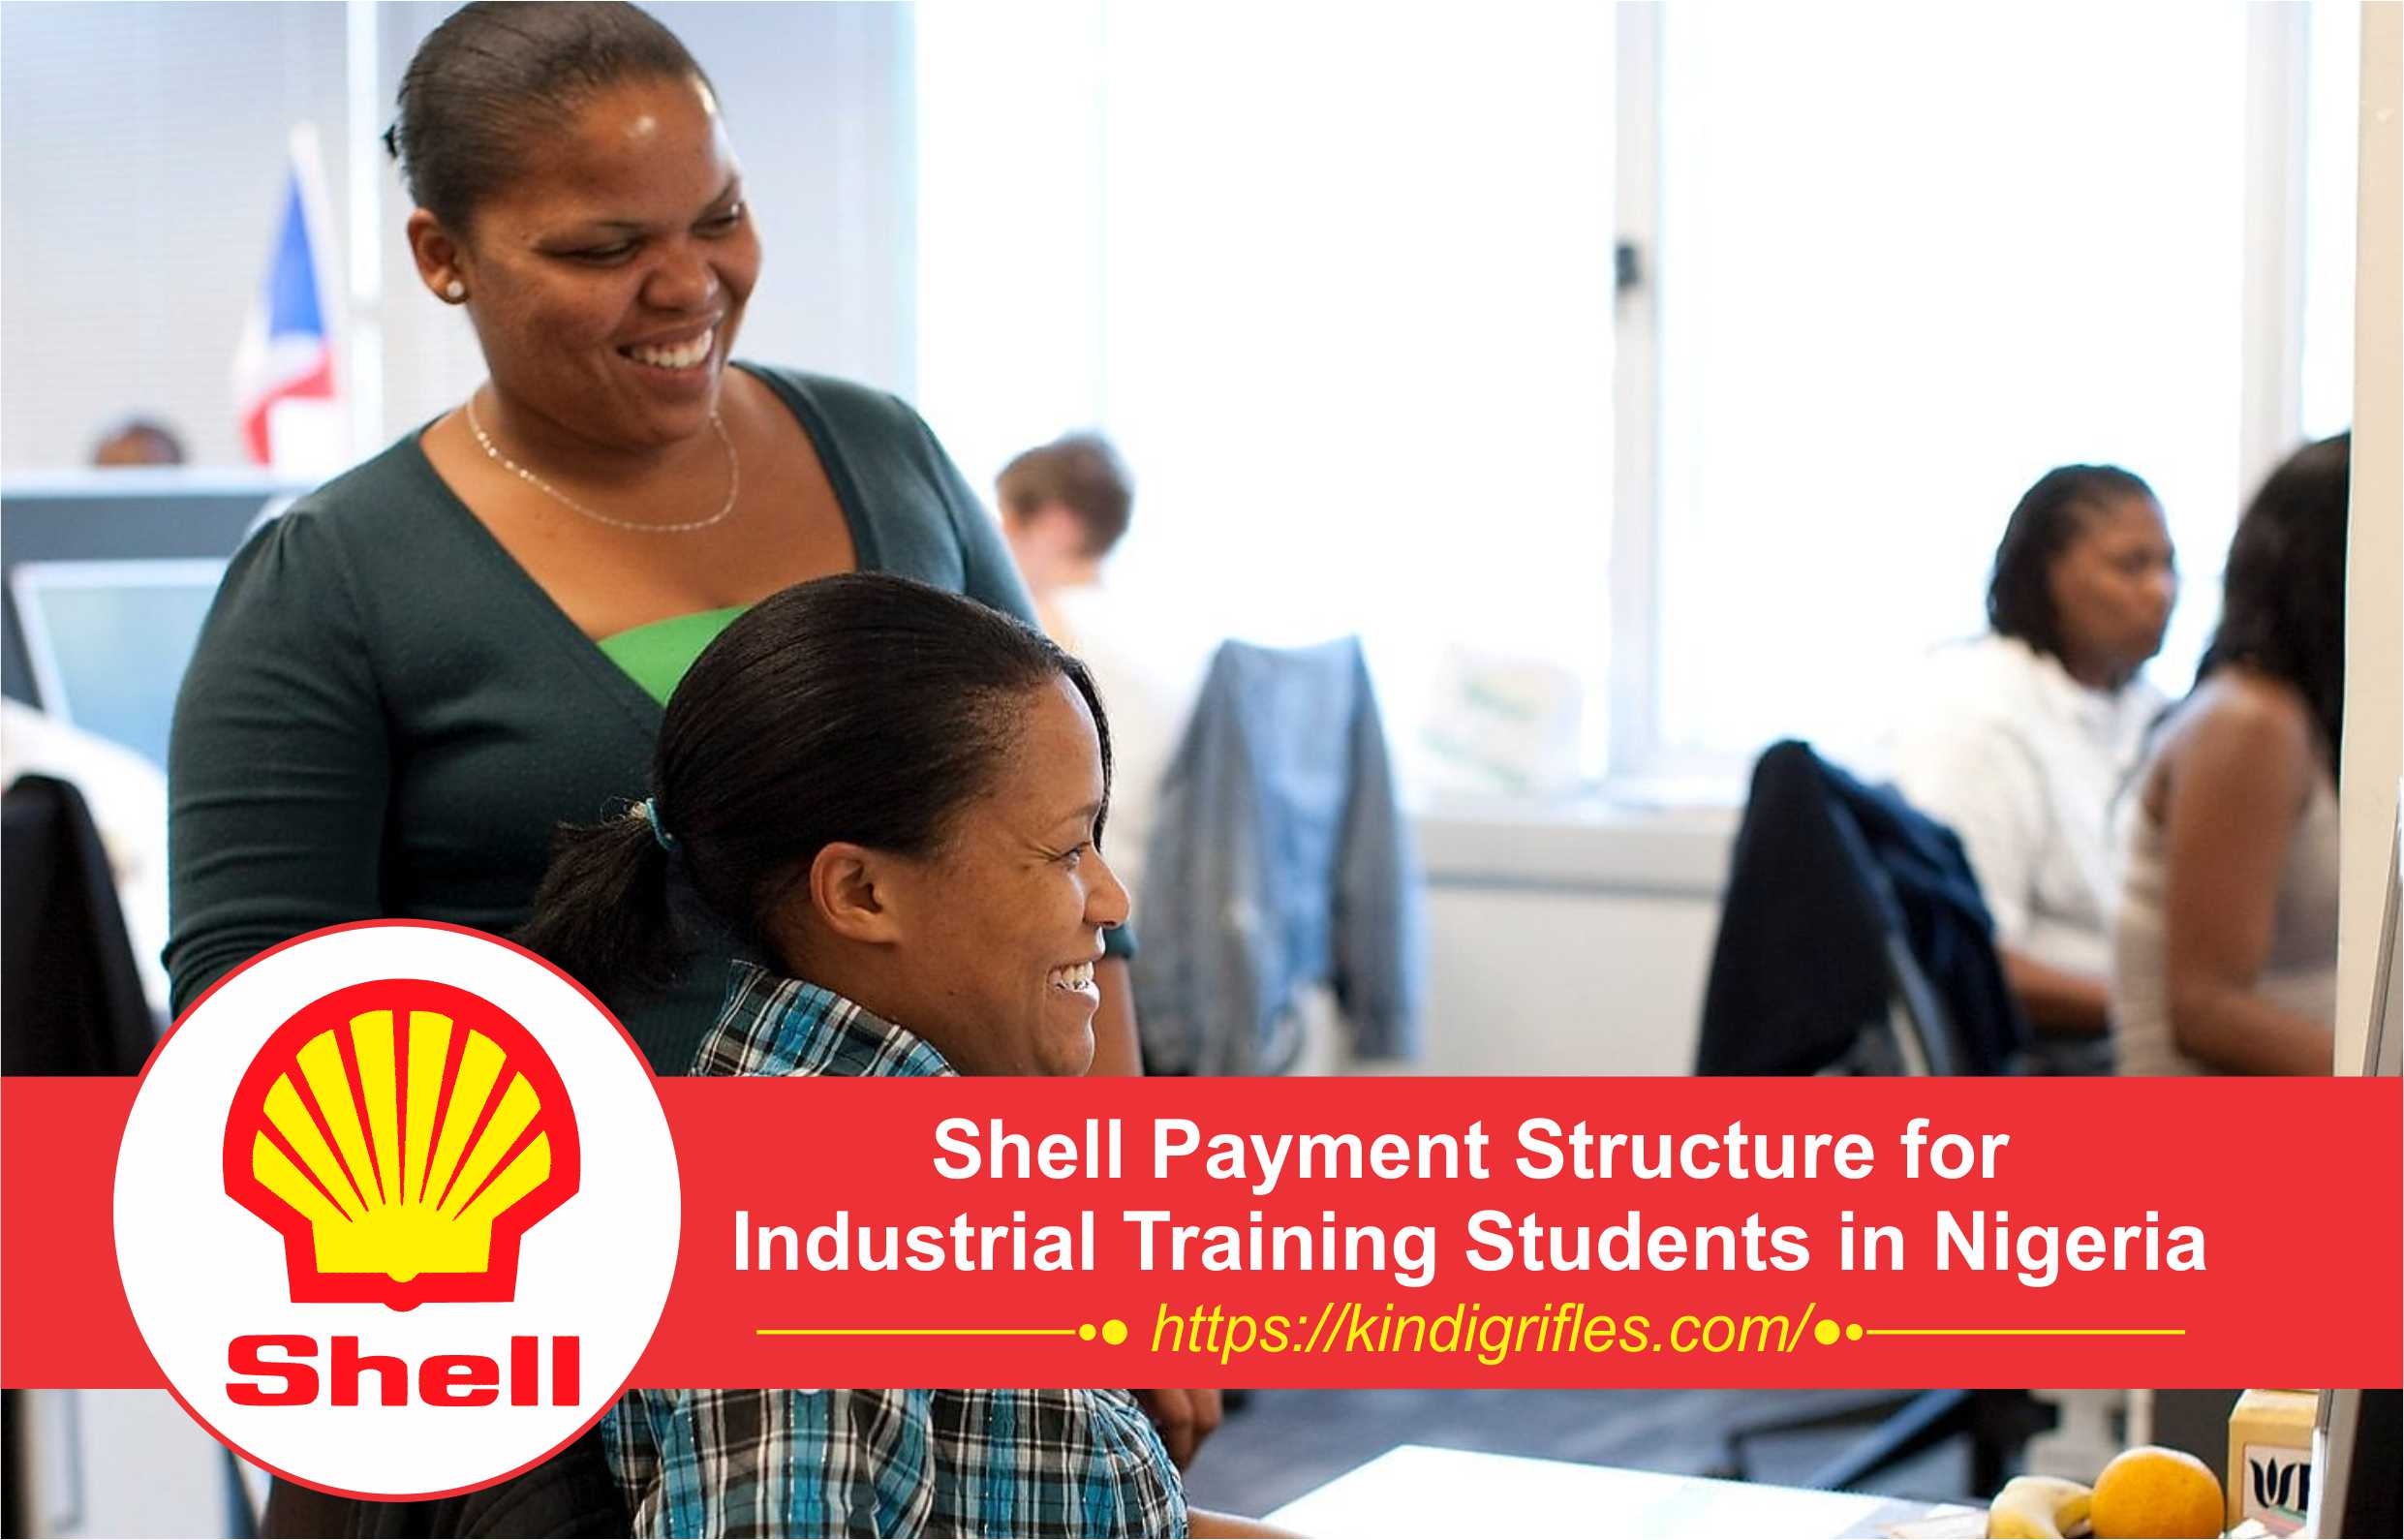 Shell Payment Structure for Industrial Training Students in Nigeria2